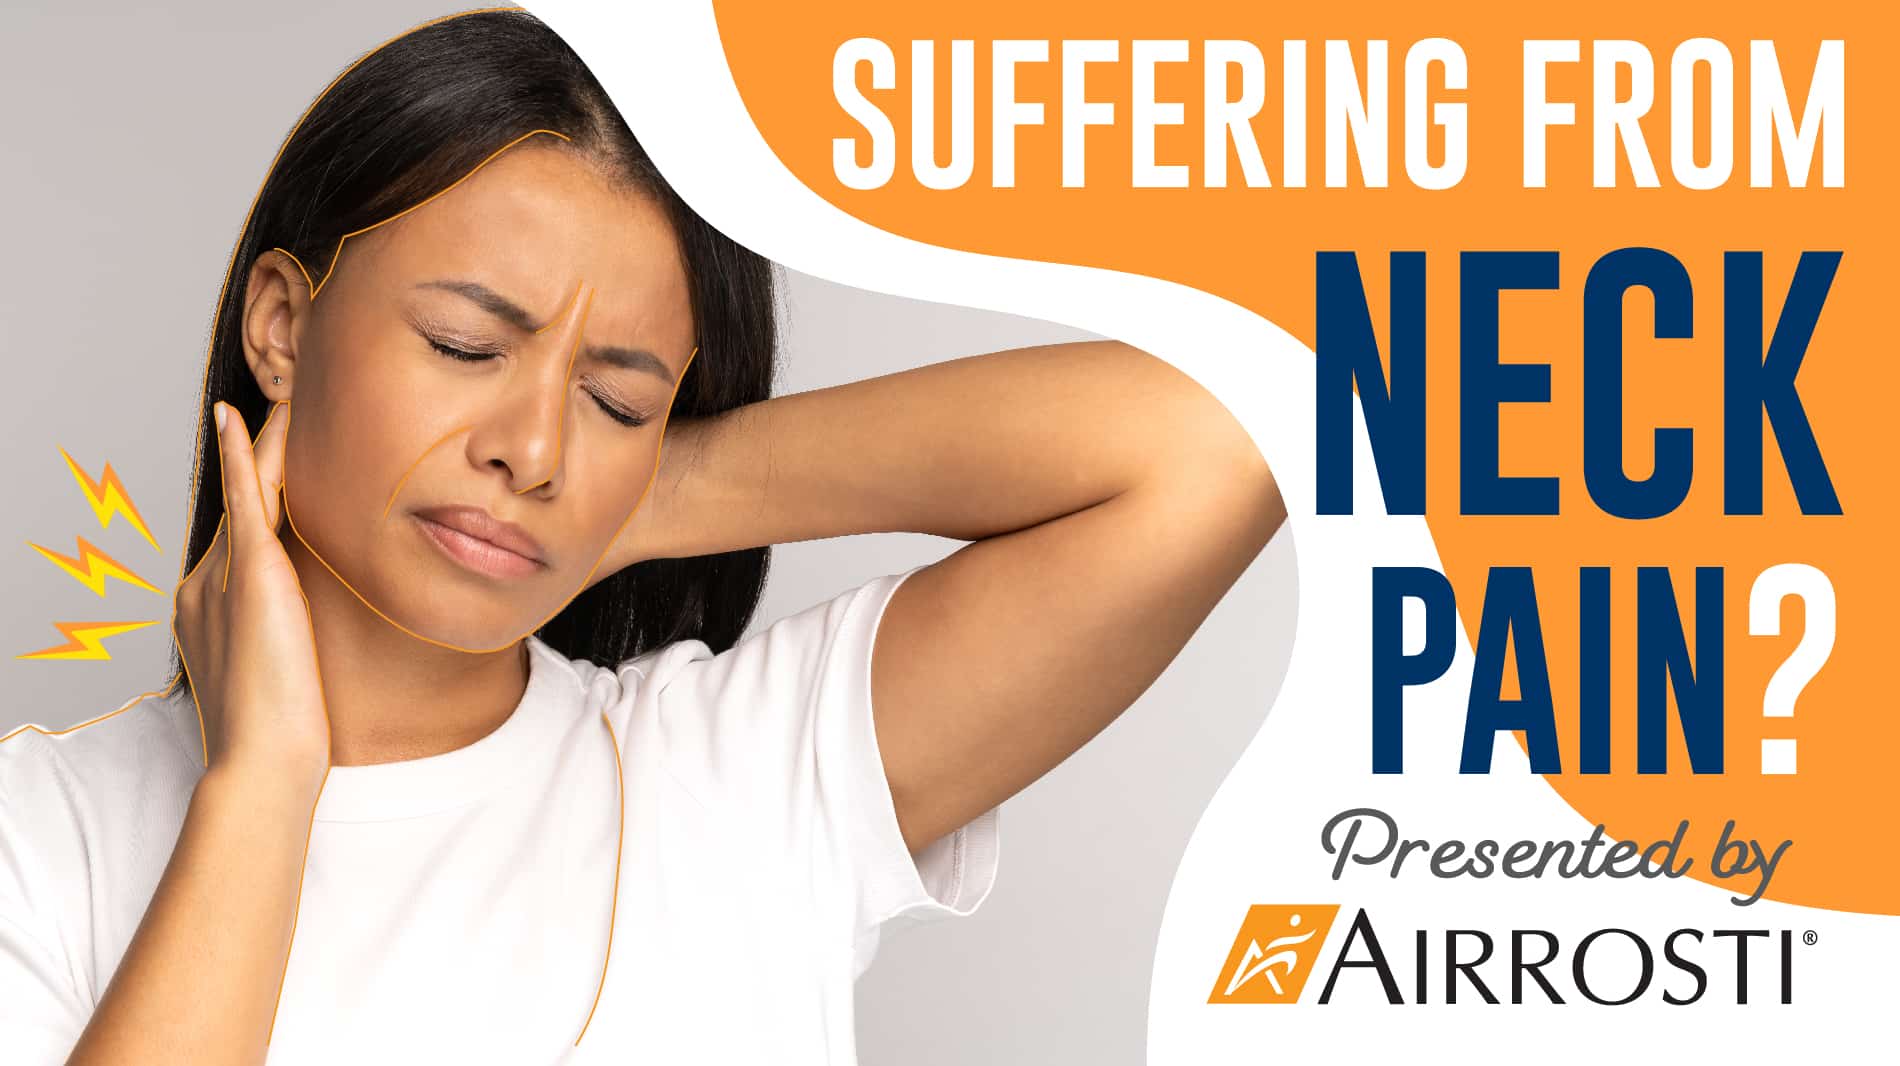 Suffering from Neck Pain? Neck Pain Webinar presented by Airrosti